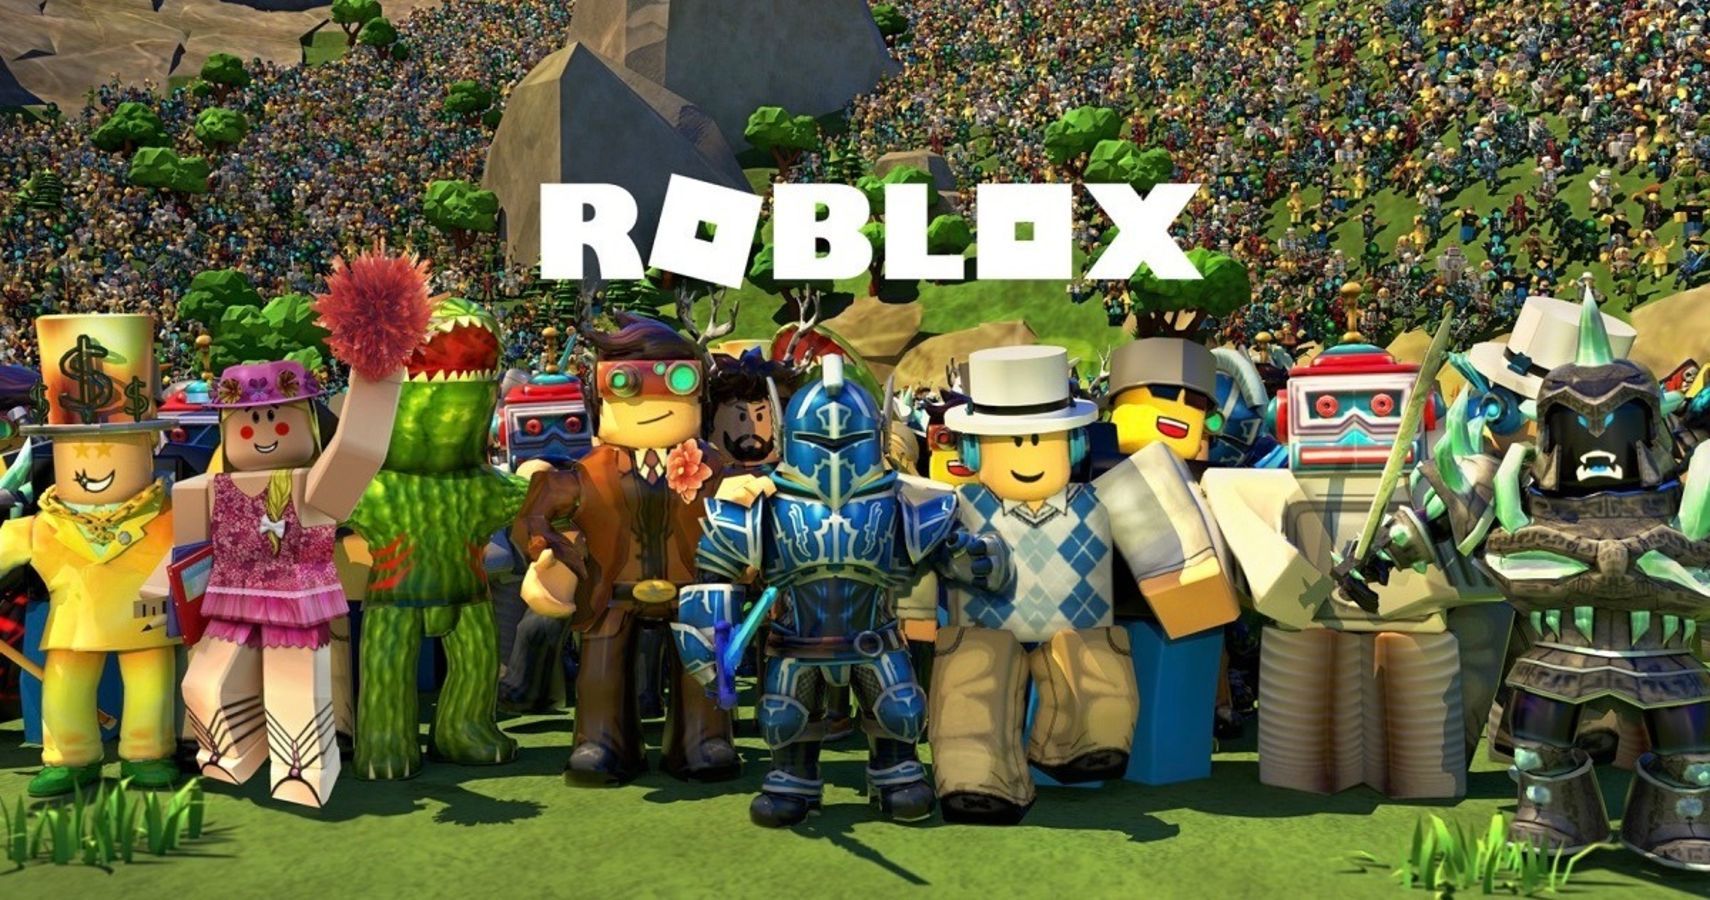 Roblox Developers Will Earn A Cool 250 Million In 2020 - roblox developer conference 2020